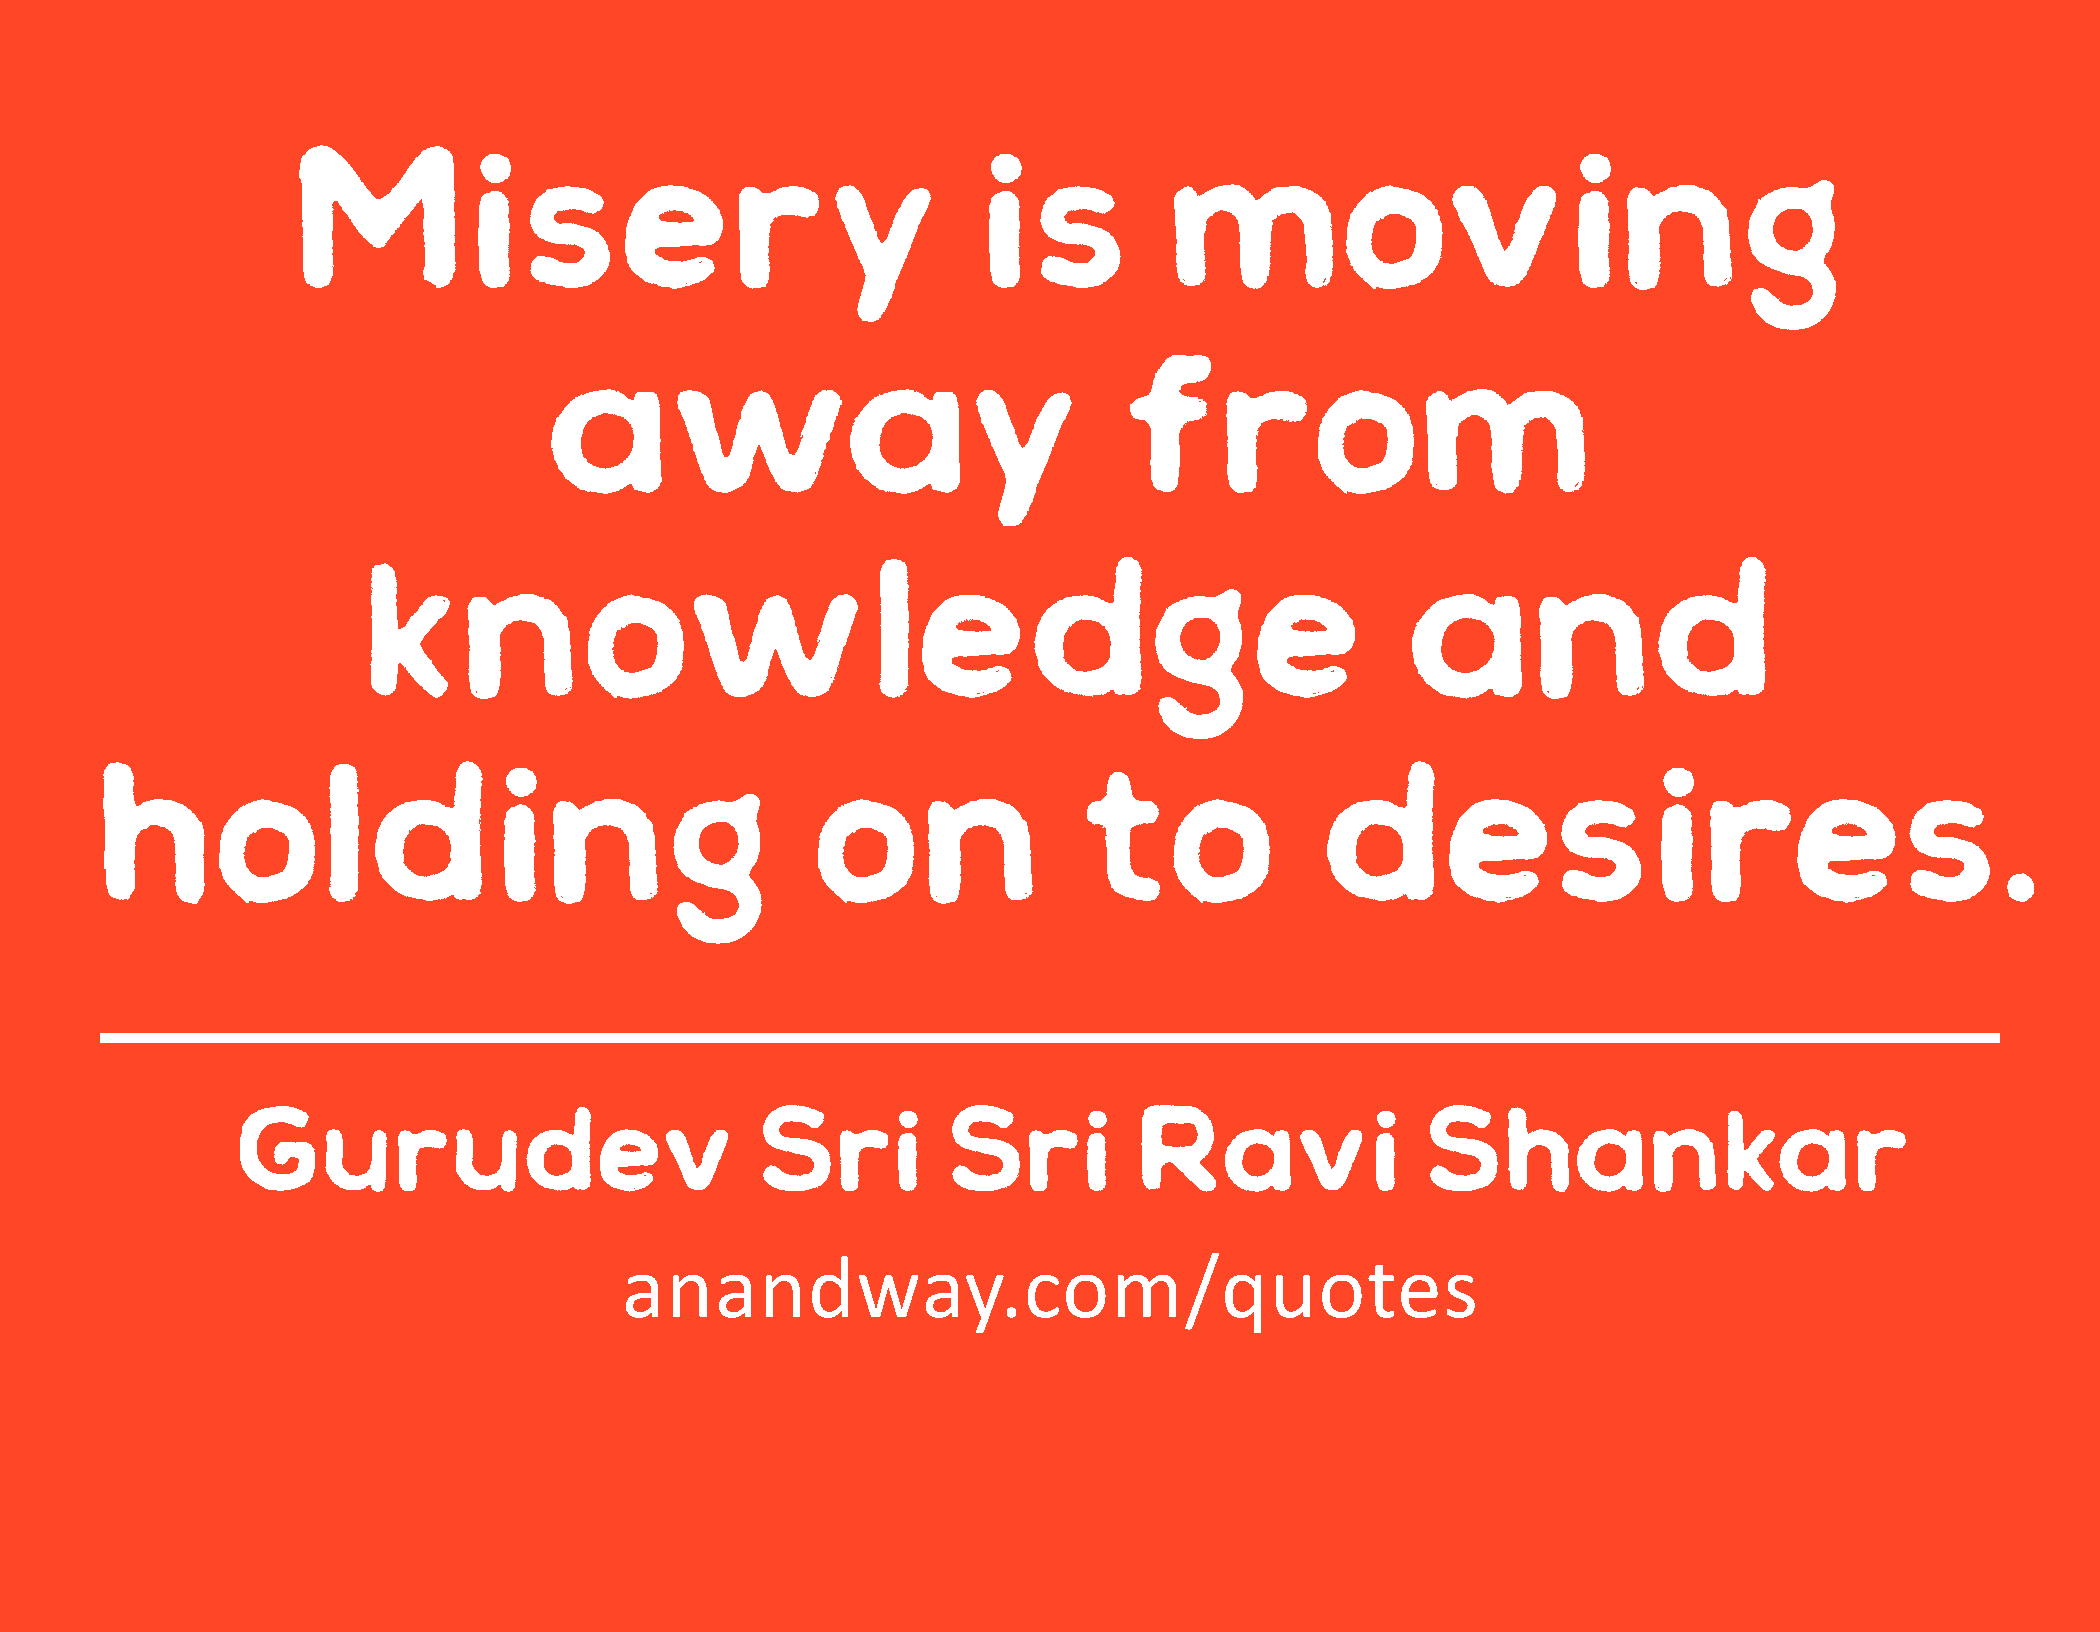 Misery is moving away from knowledge and holding on to desires. 
 -Gurudev Sri Sri Ravi Shankar